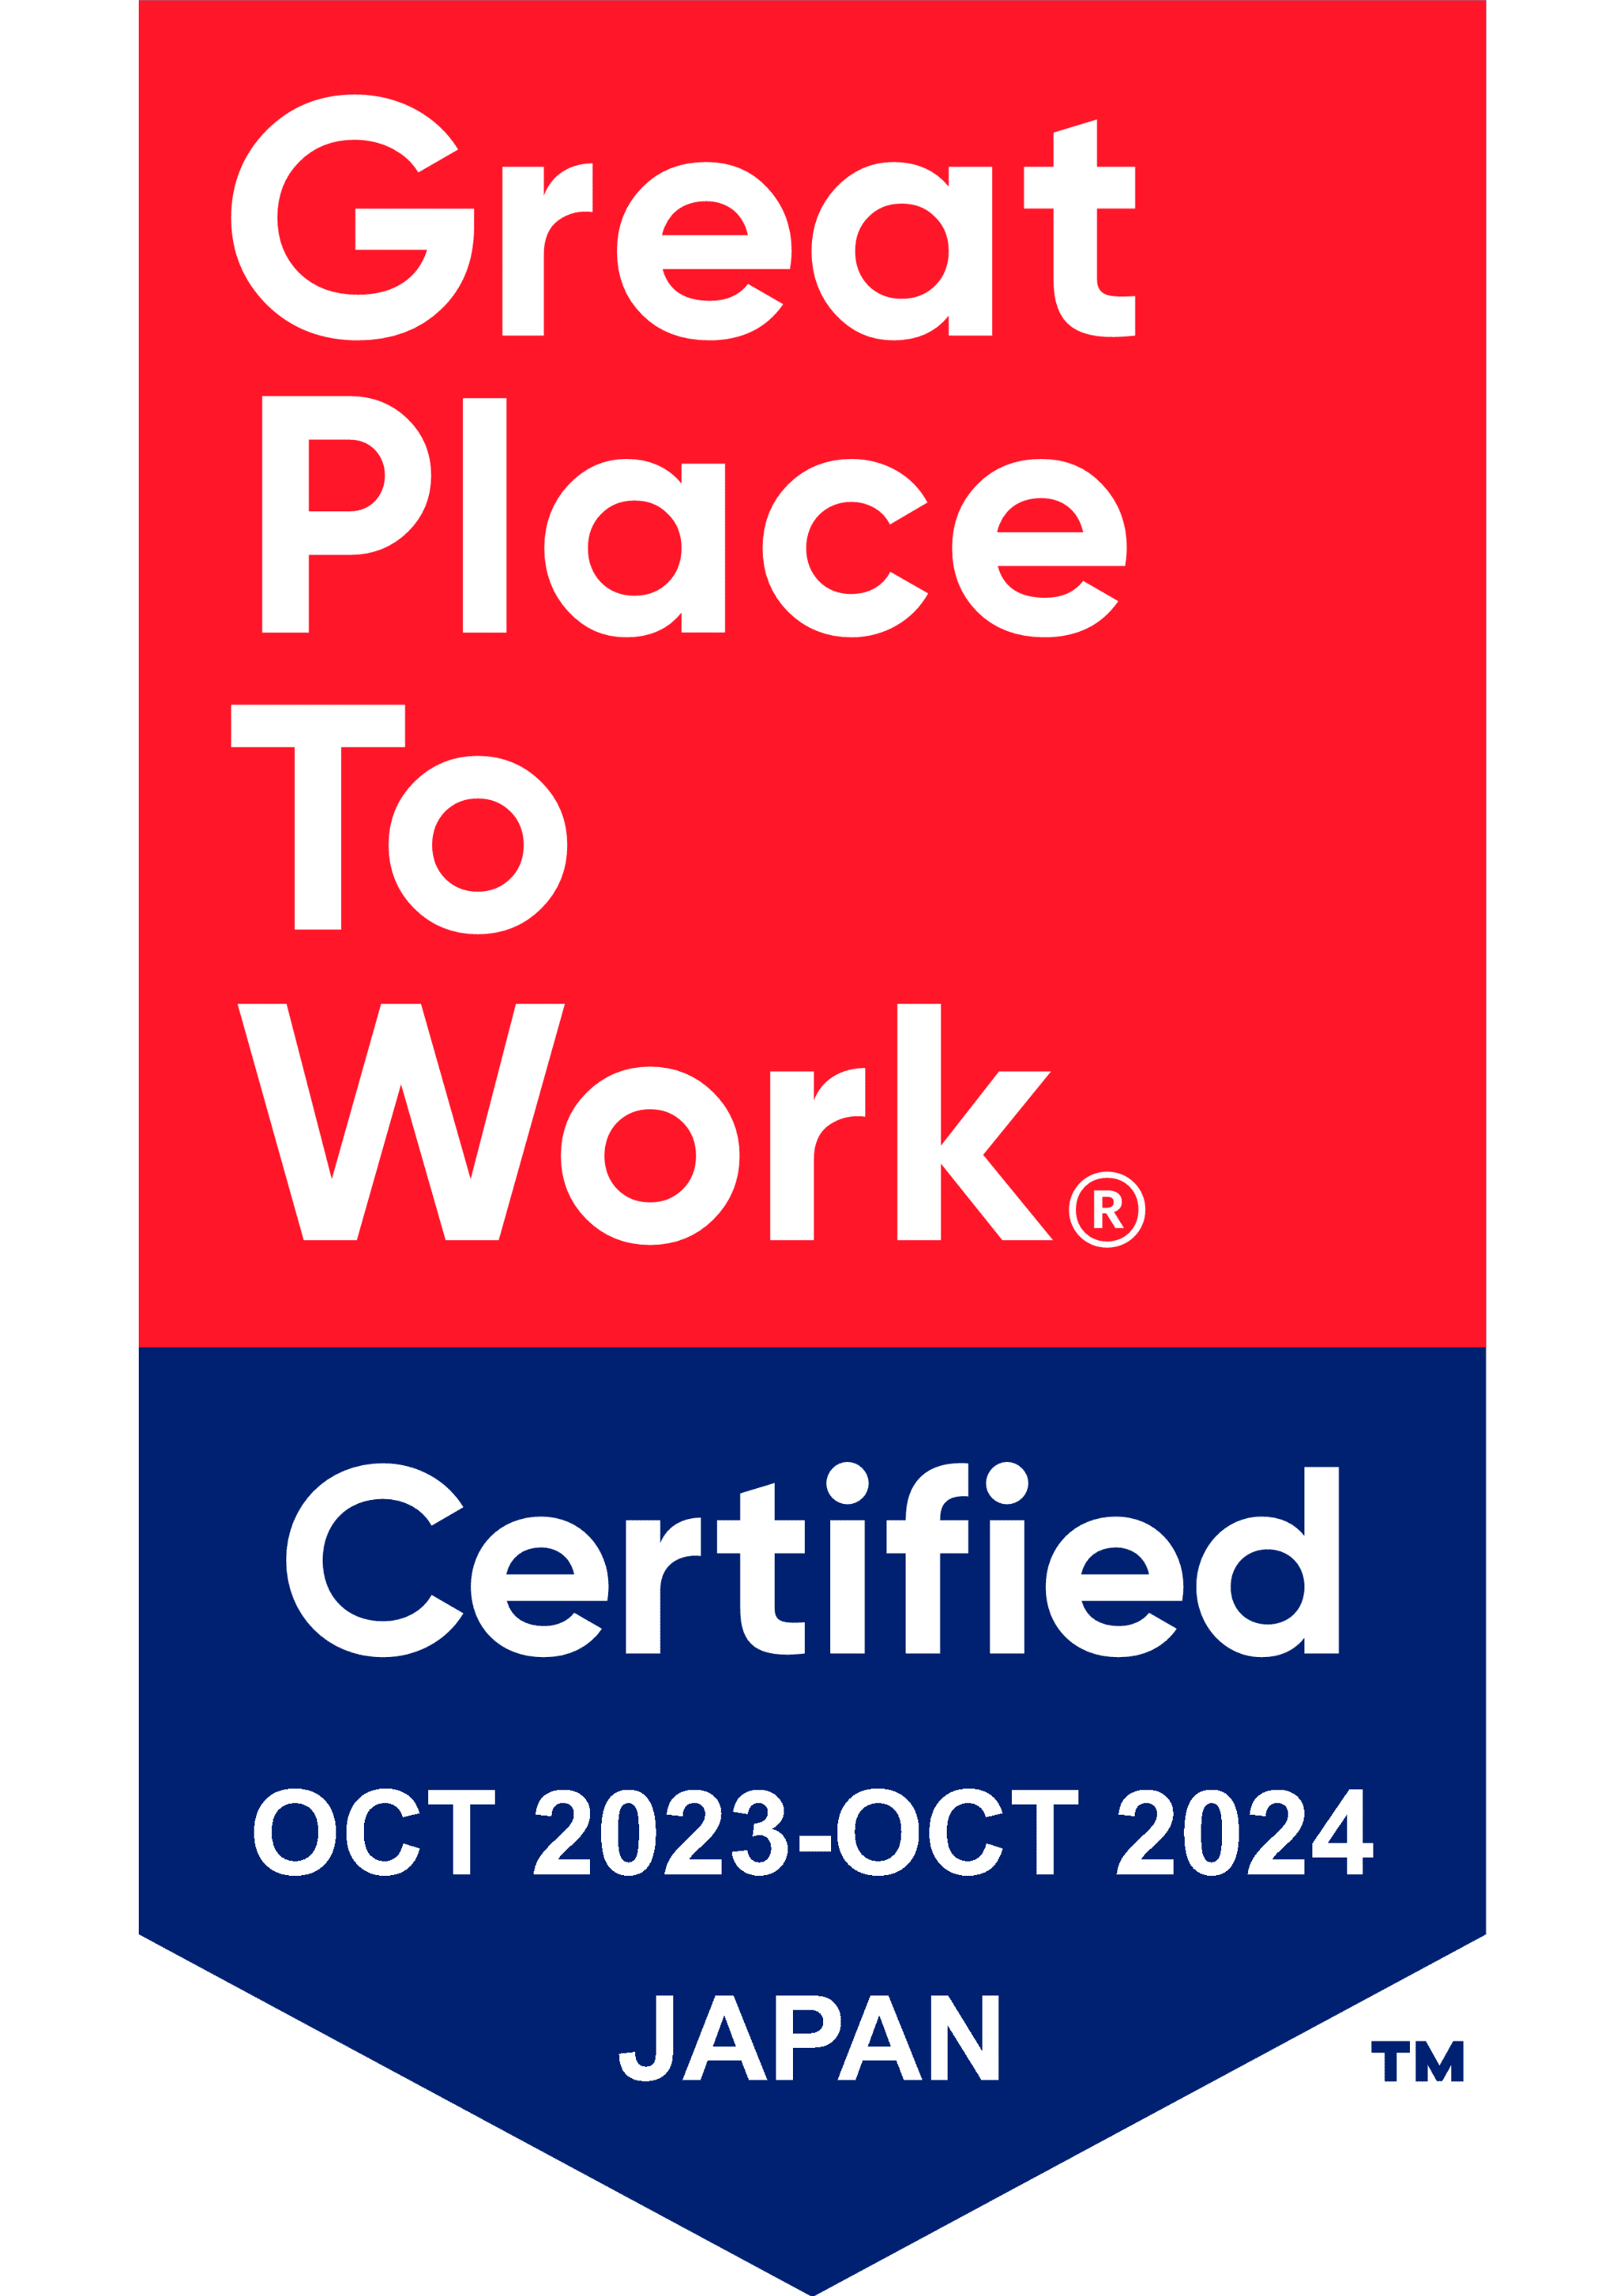 Great Place To Work 働きがい認定企業